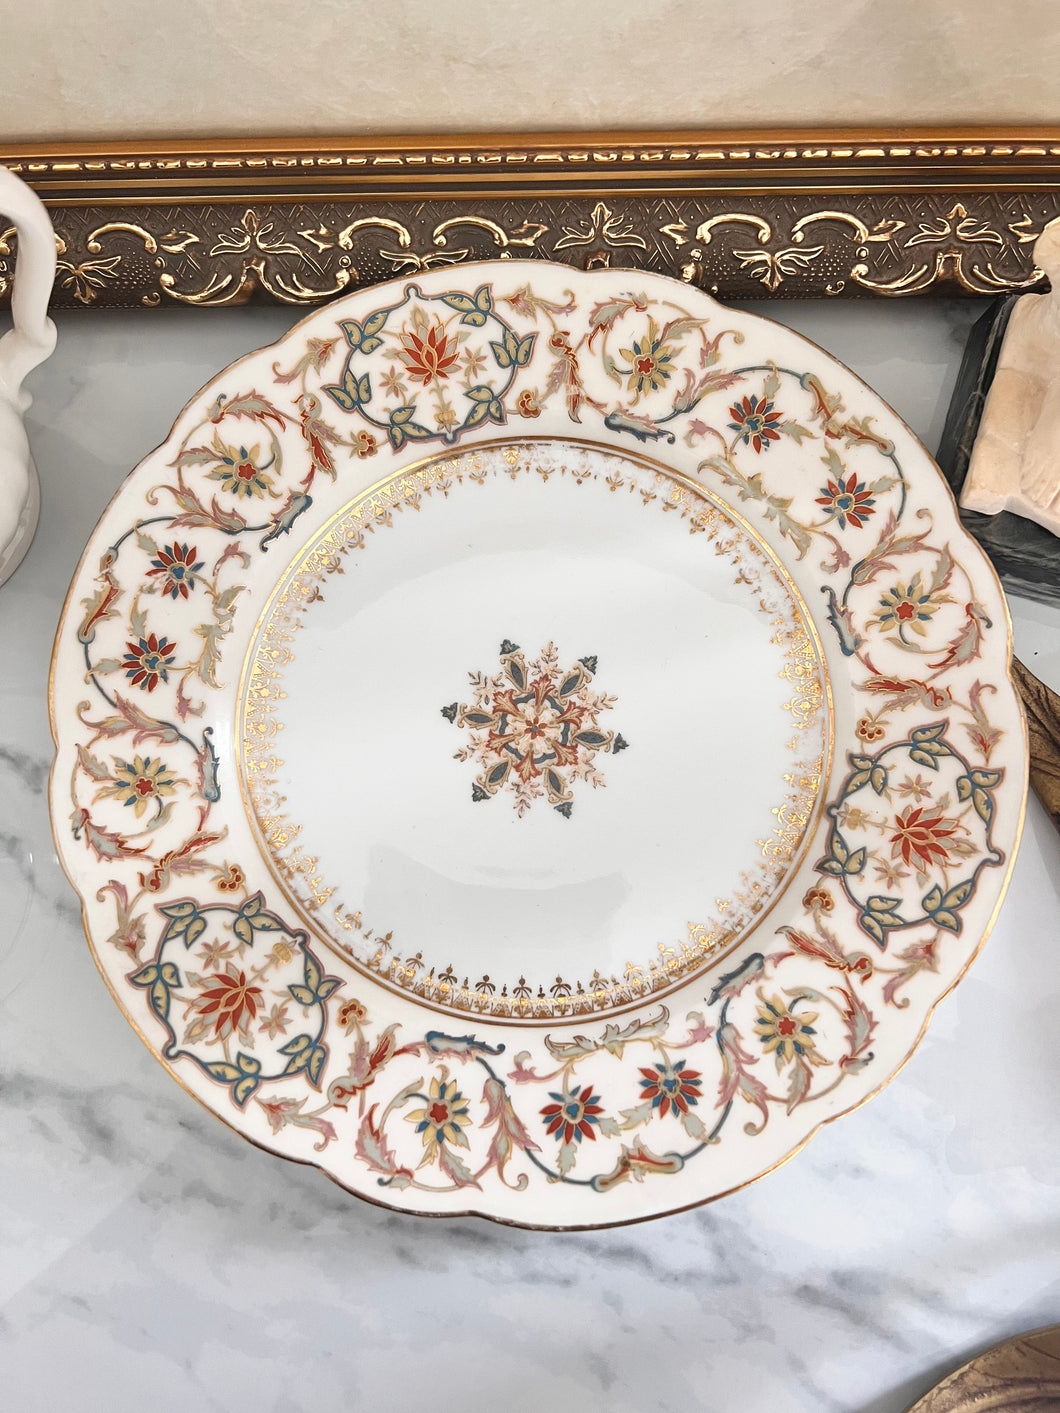 Beautiful Plate - Made in France